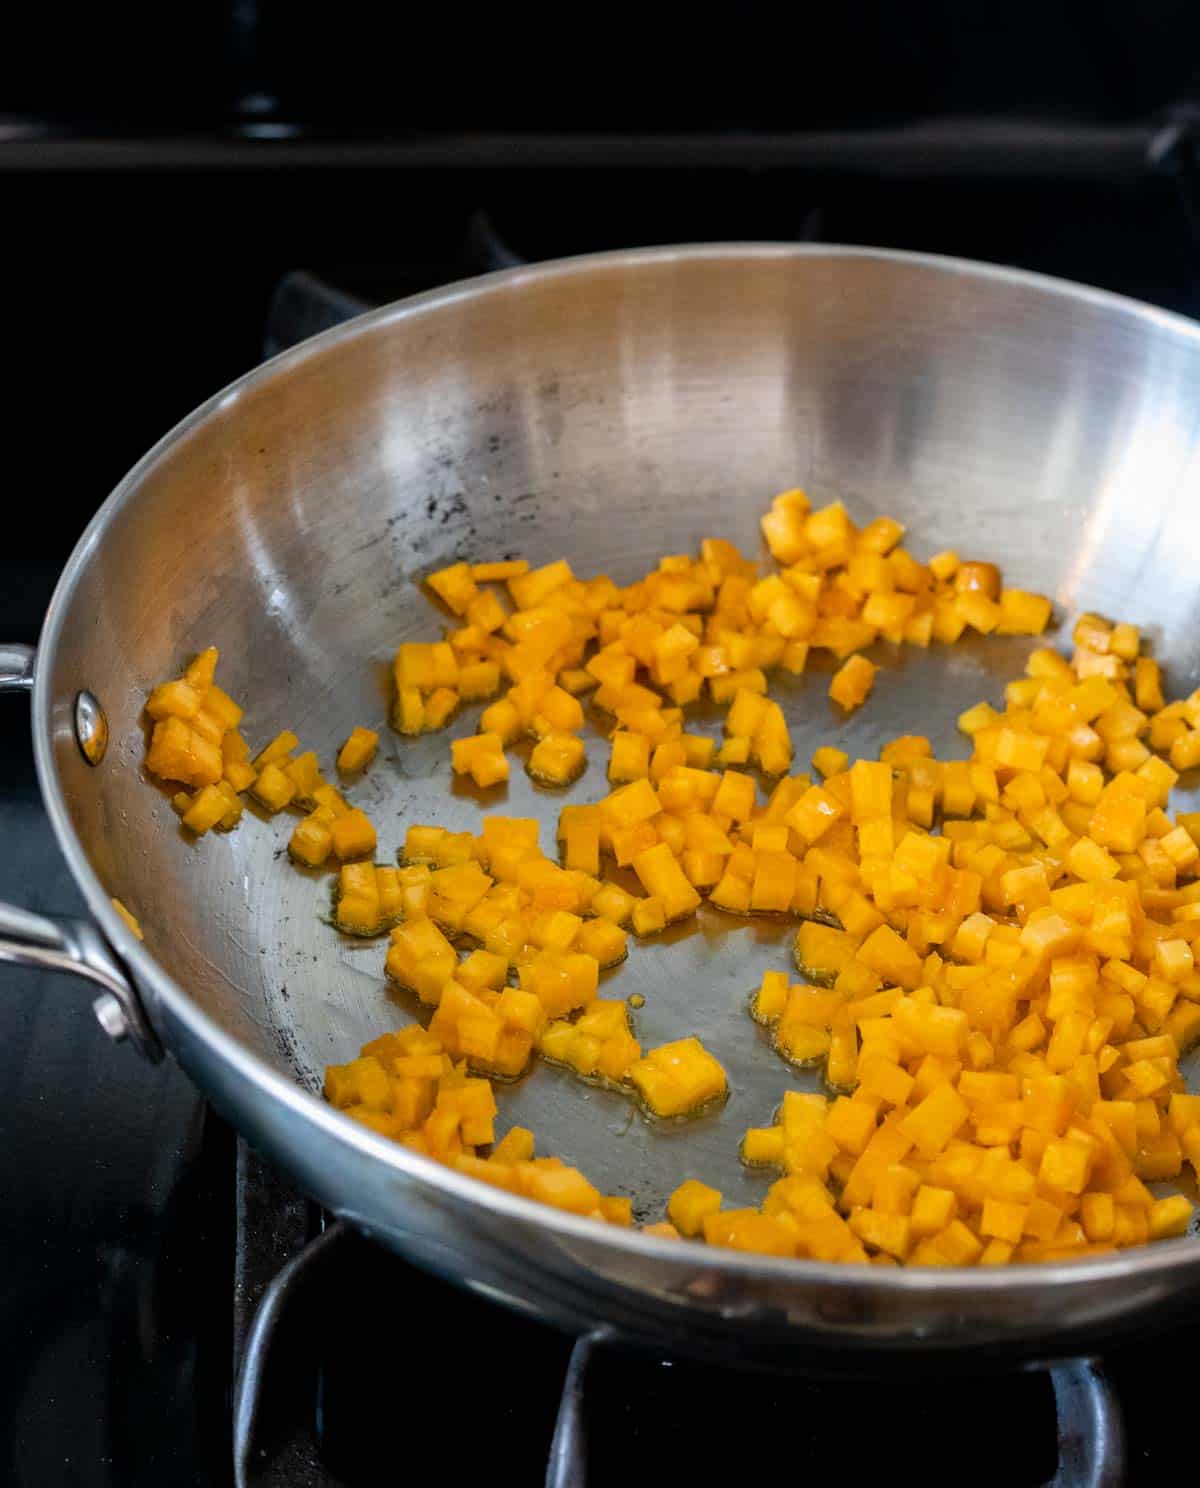 Diced pumpkin browning in a high sided skillet on the stovetop.